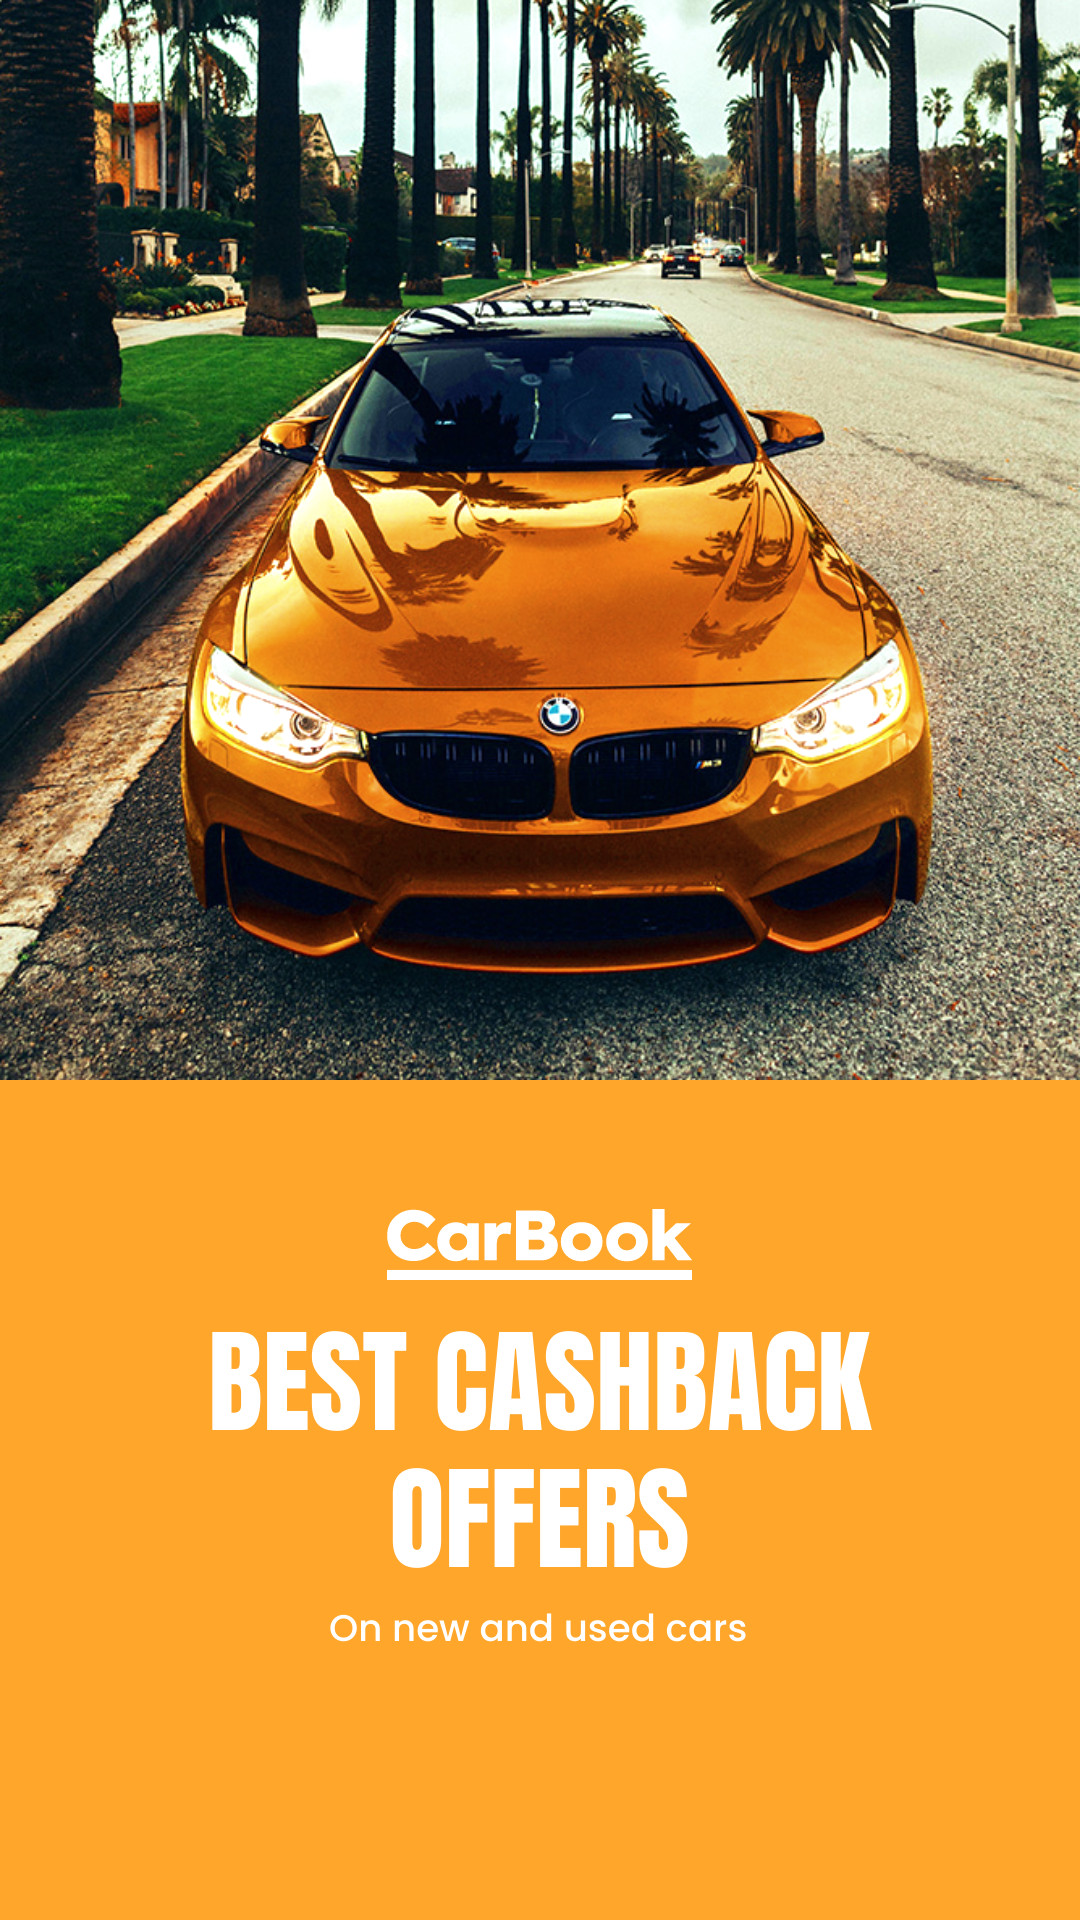 Buy Cars with Best Cashback Offers